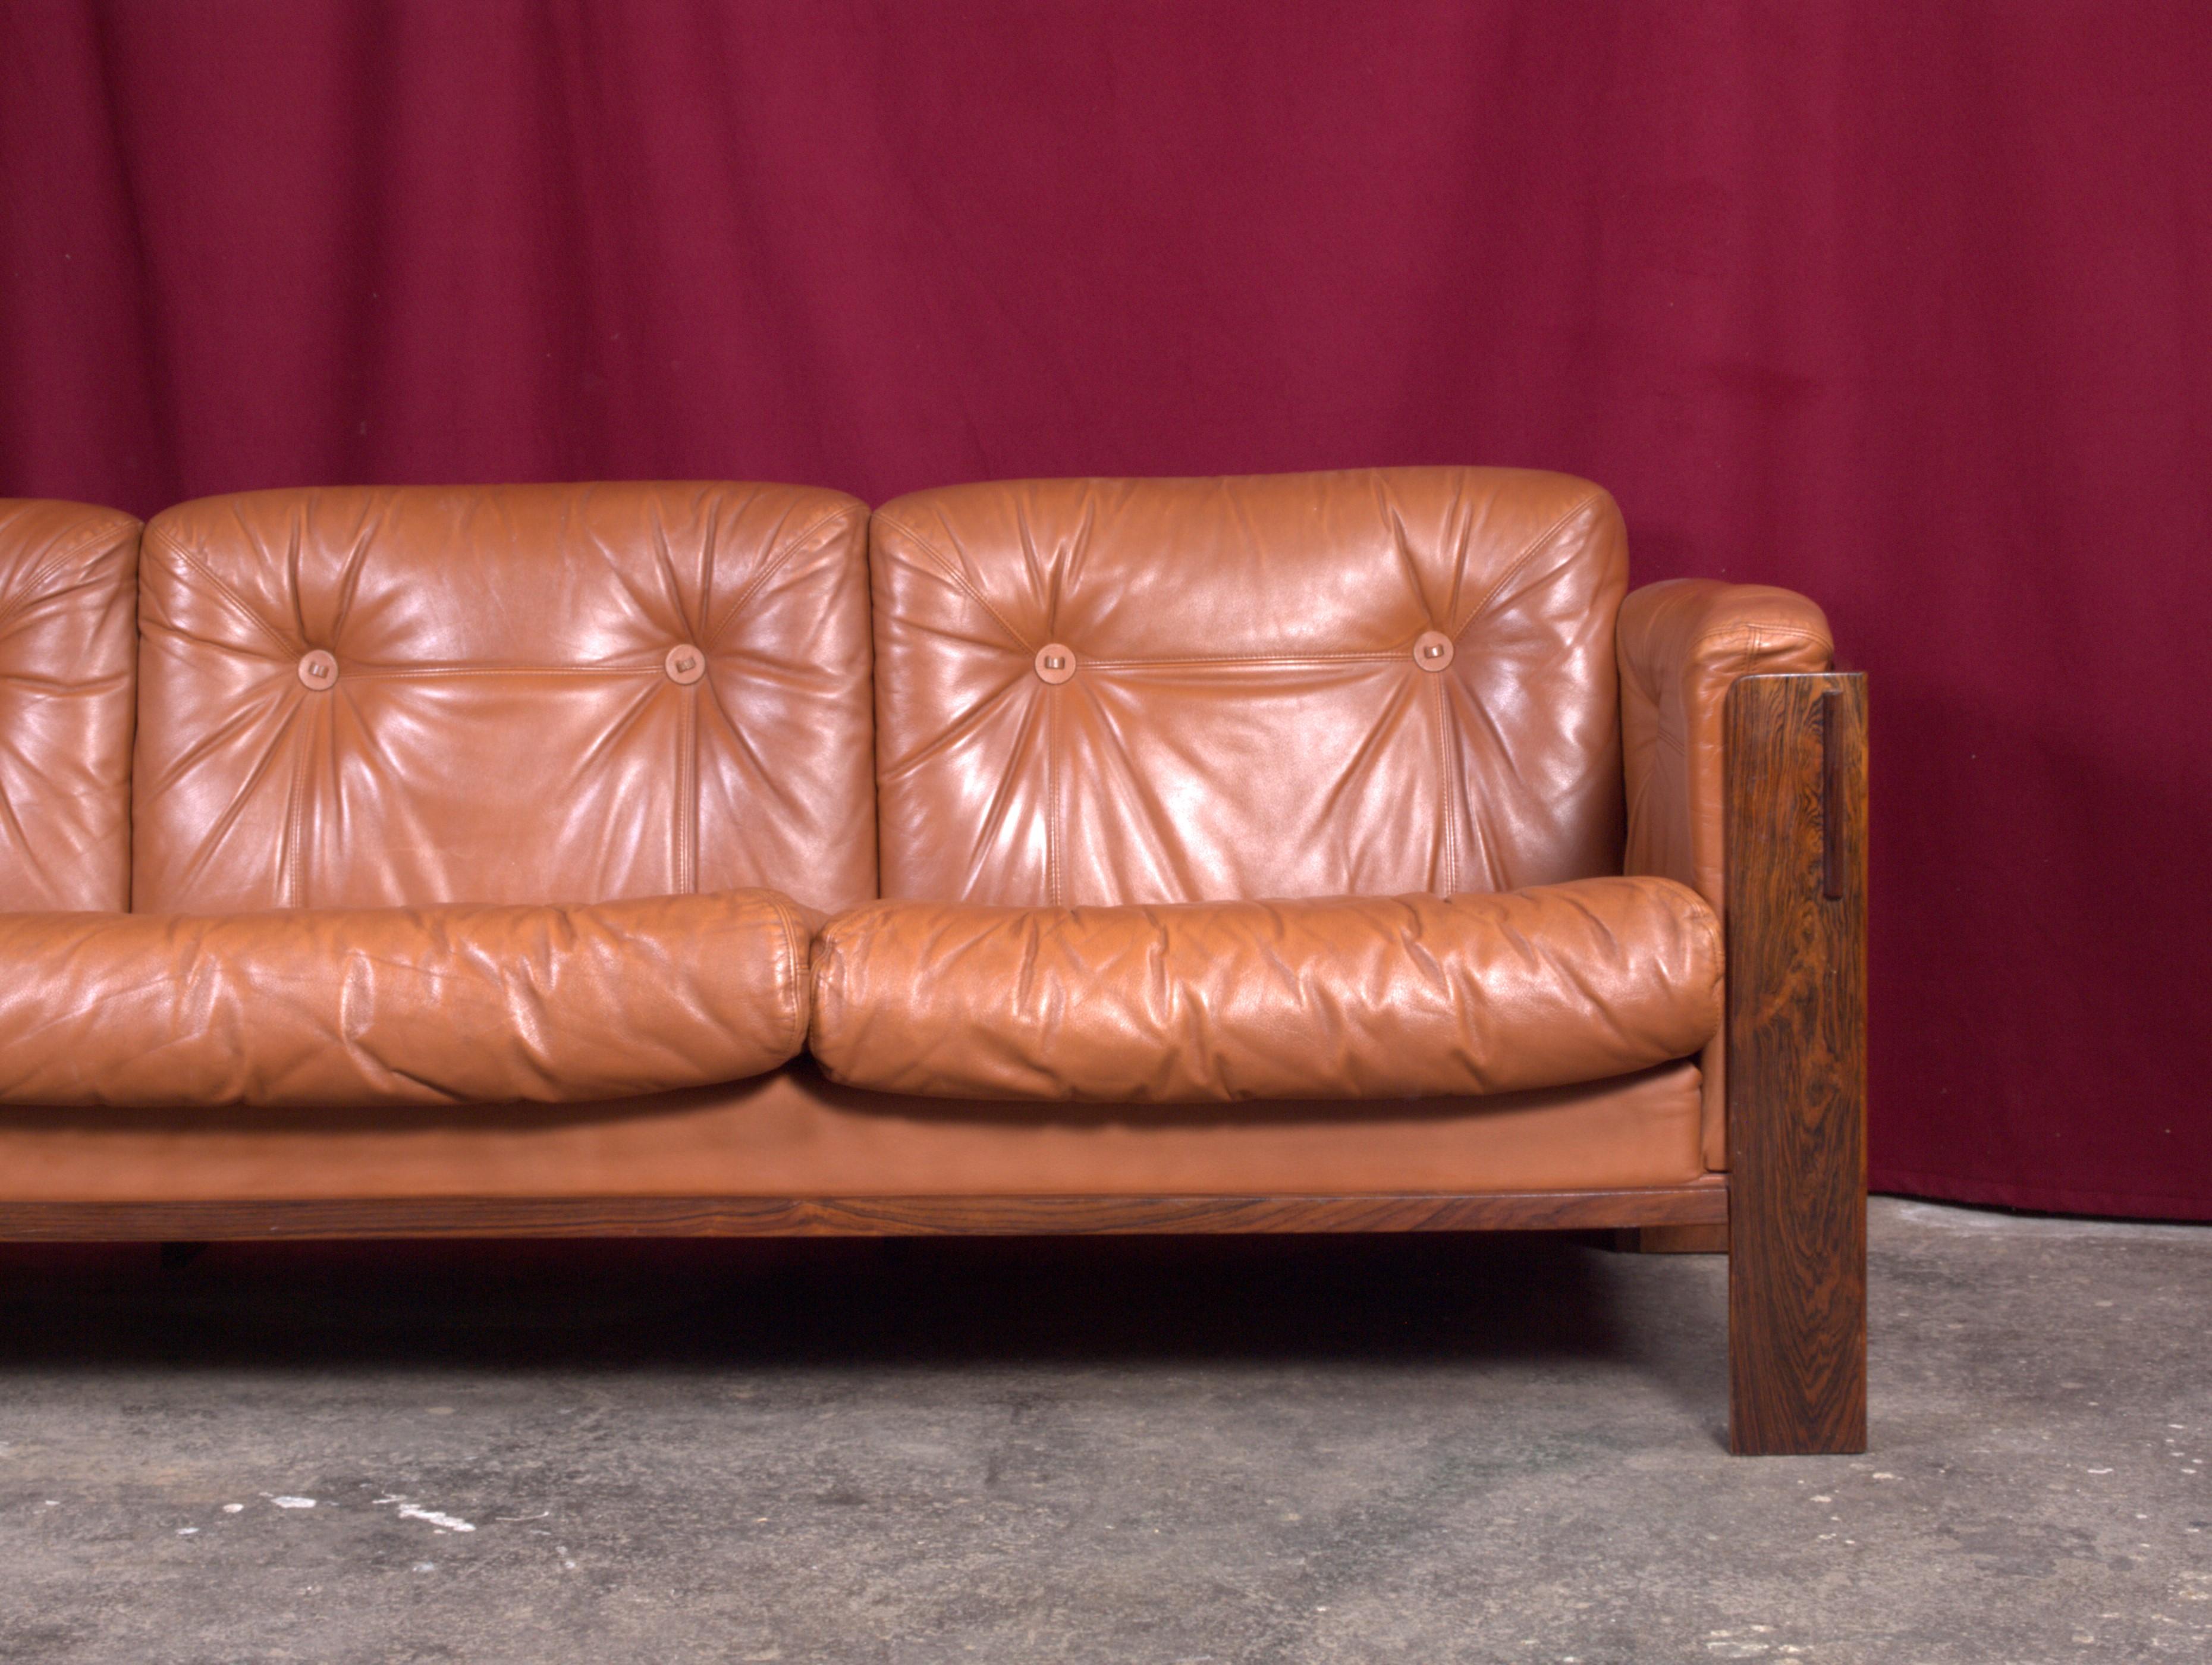 Extremely rare and special sofa from the 1960s / 1970s in rosewood and tan colored leather in very good condition. Perfectly patinated by the time. From the years of our most prominent designers and architects, most likely from Norway or